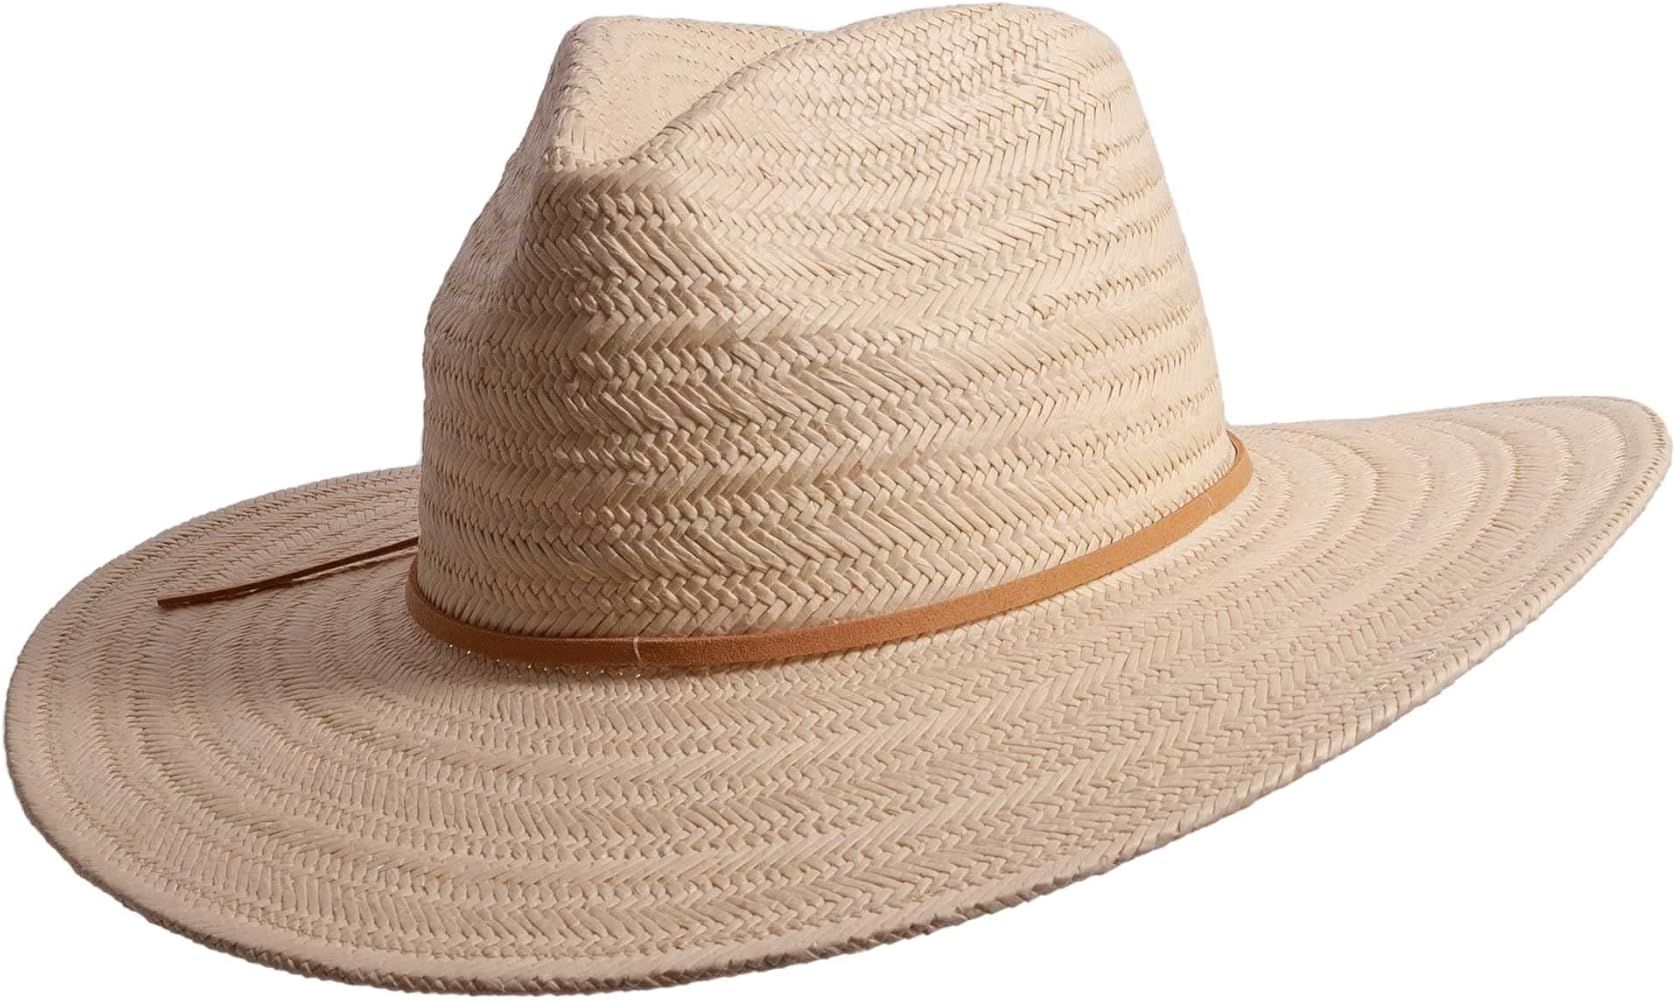 American Hat Makers Paulo Natural Straw Sun hat Parent | Amazon (US)